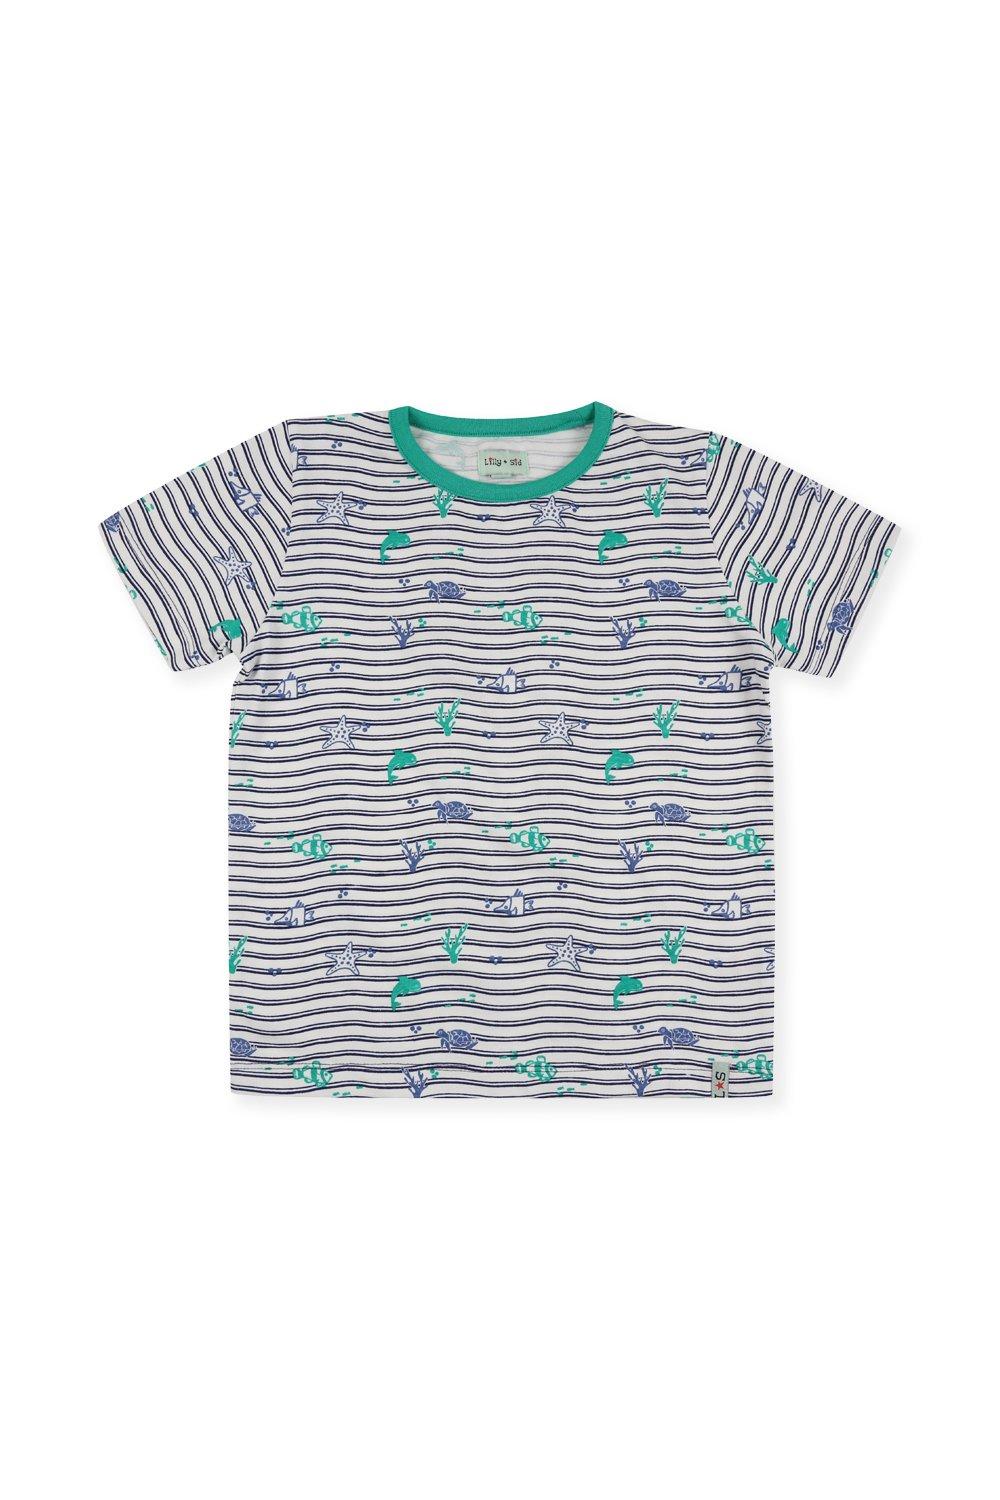 Under The Sea T-Shirt